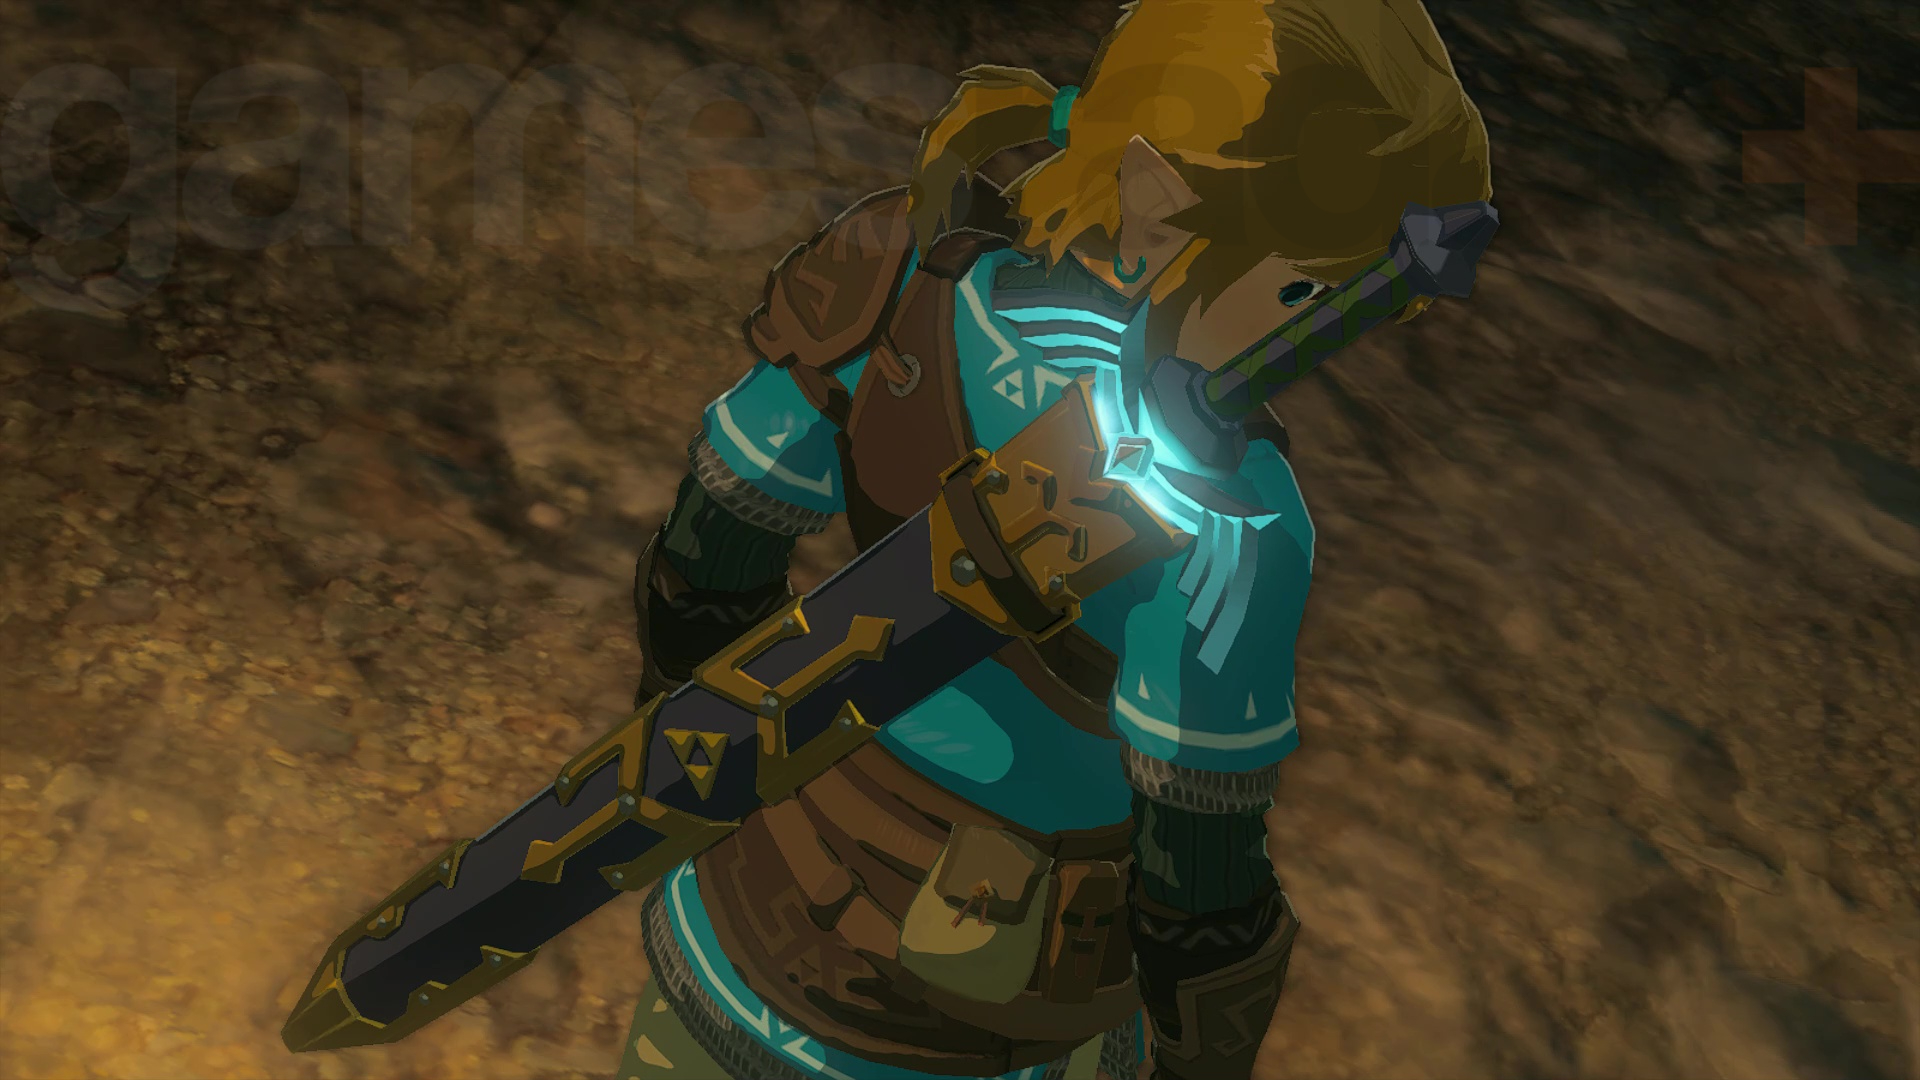 Have a look at The Legend of Zelda: Breath of the Wild - Master